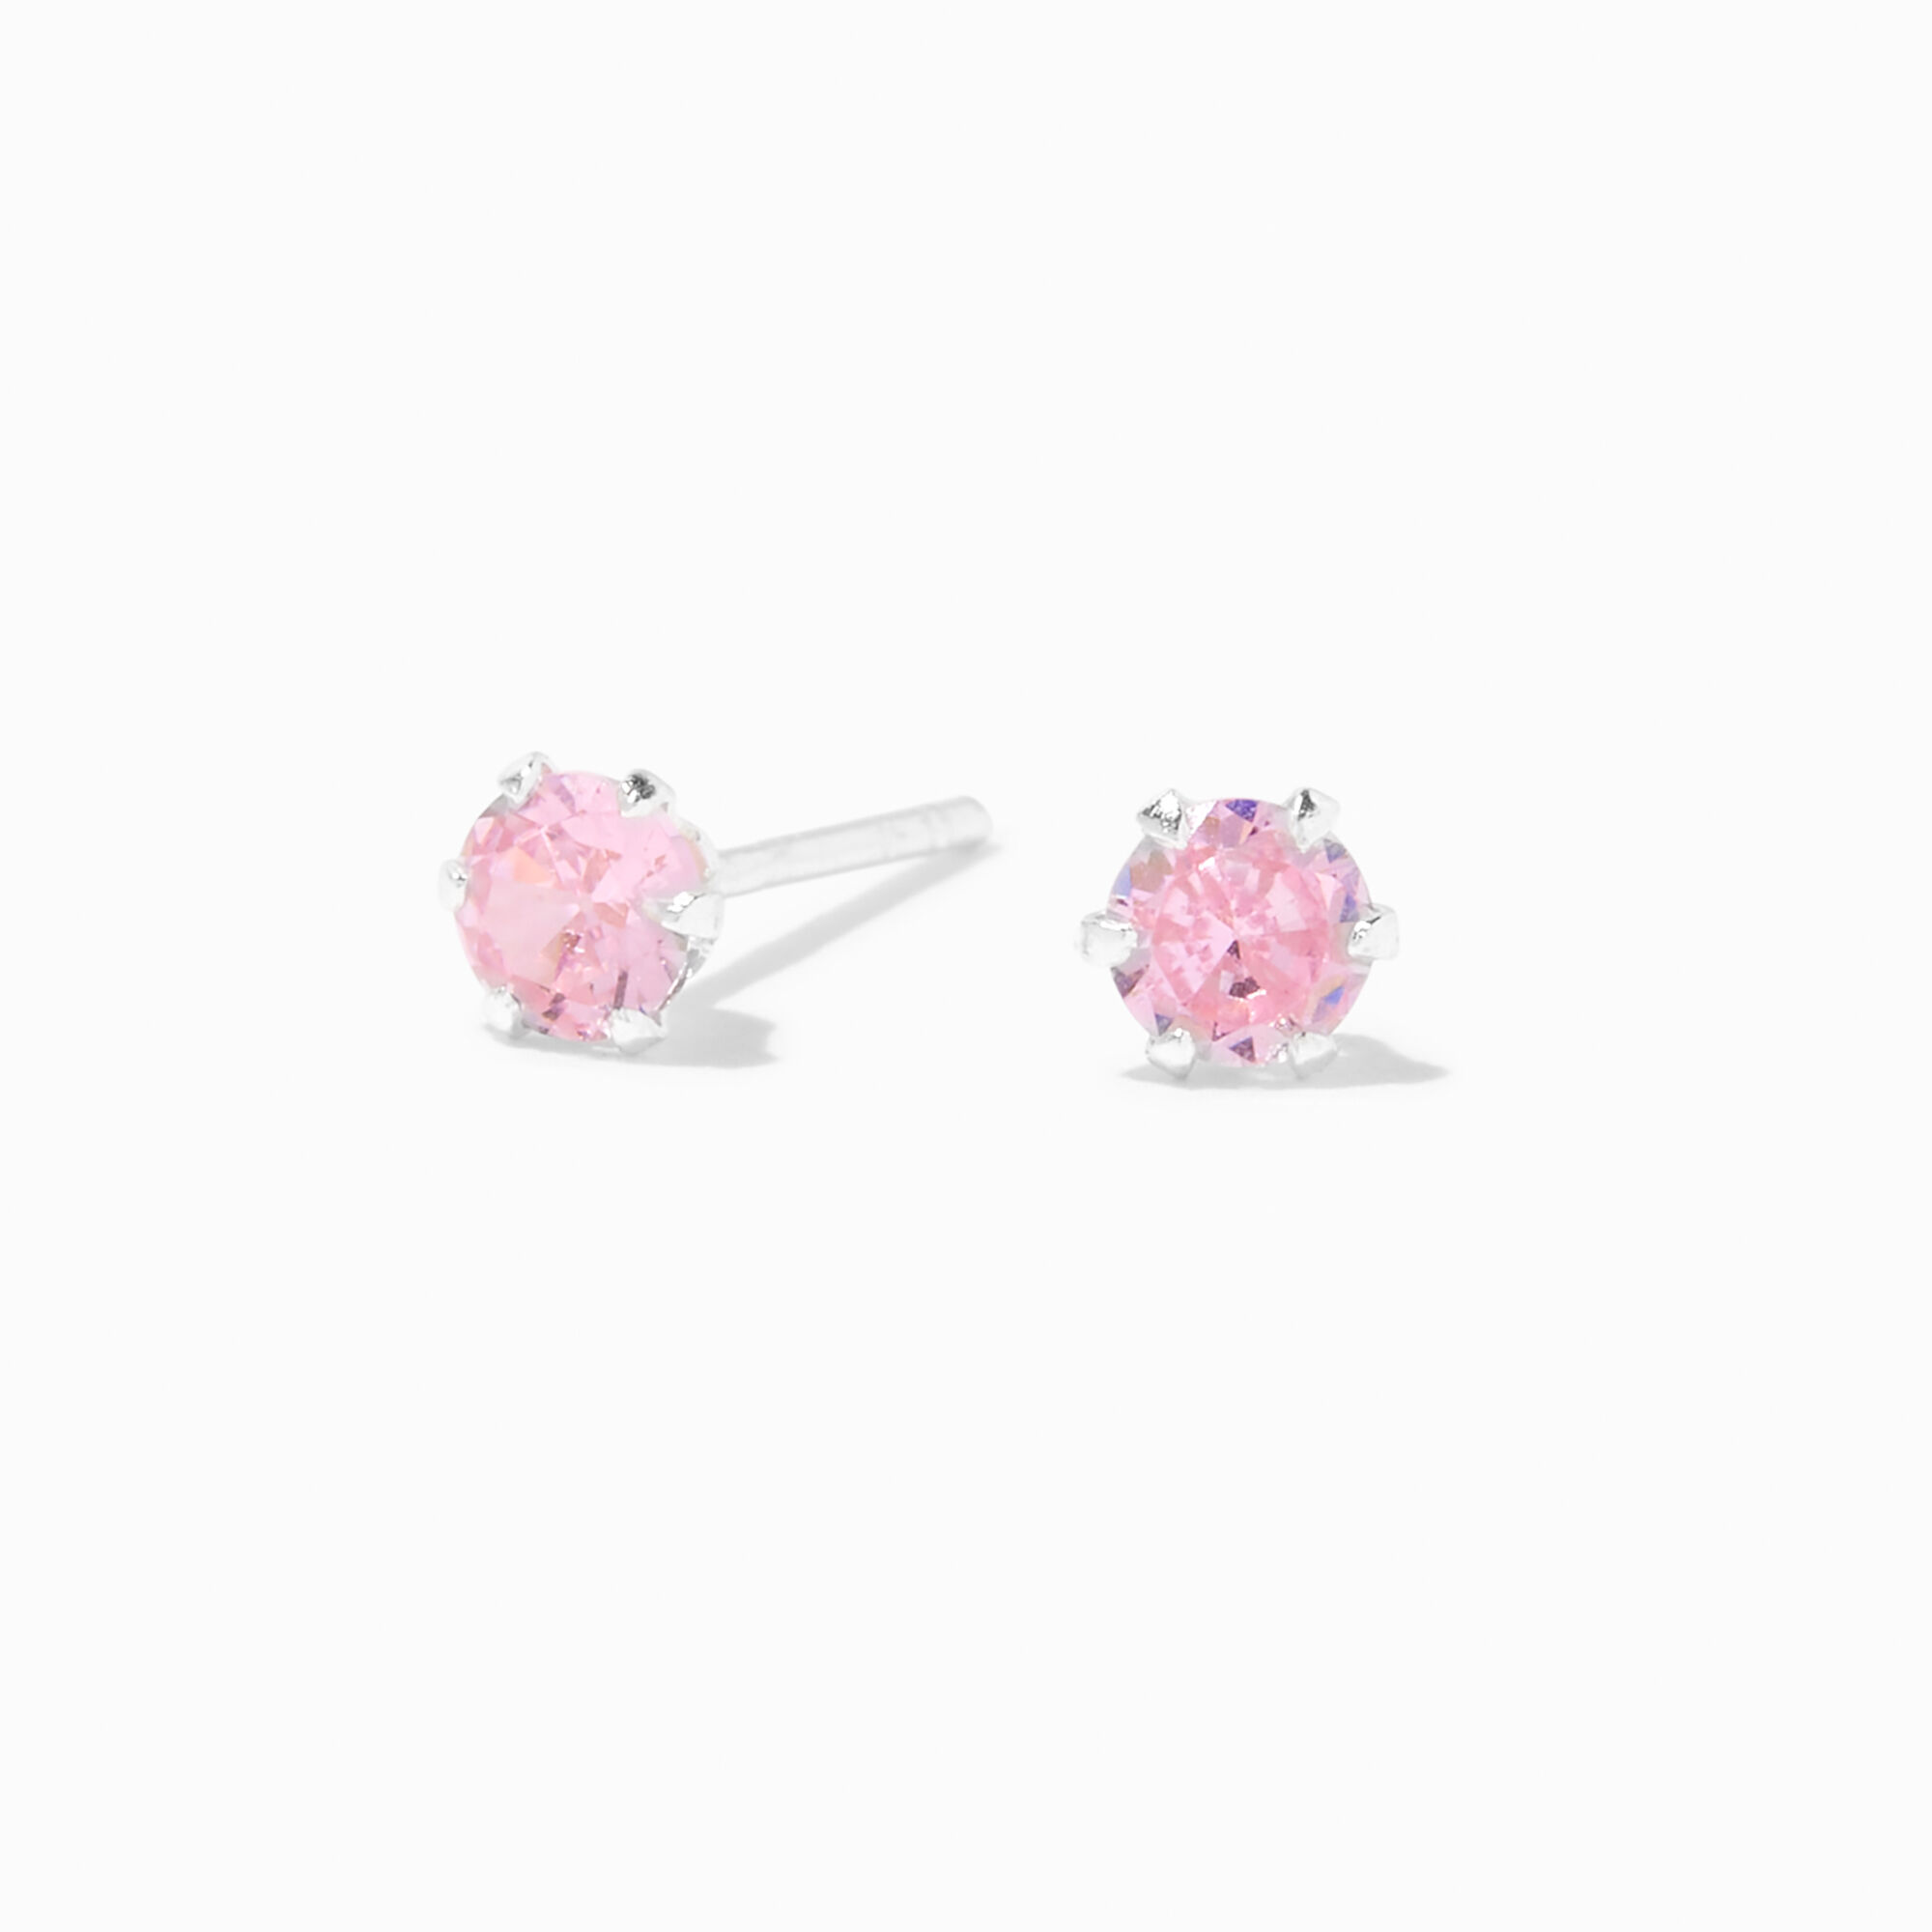 View C Luxe By Claires Sterling Silver Cubic Zirconia Light 4MM Round Stud Earrings Pink information